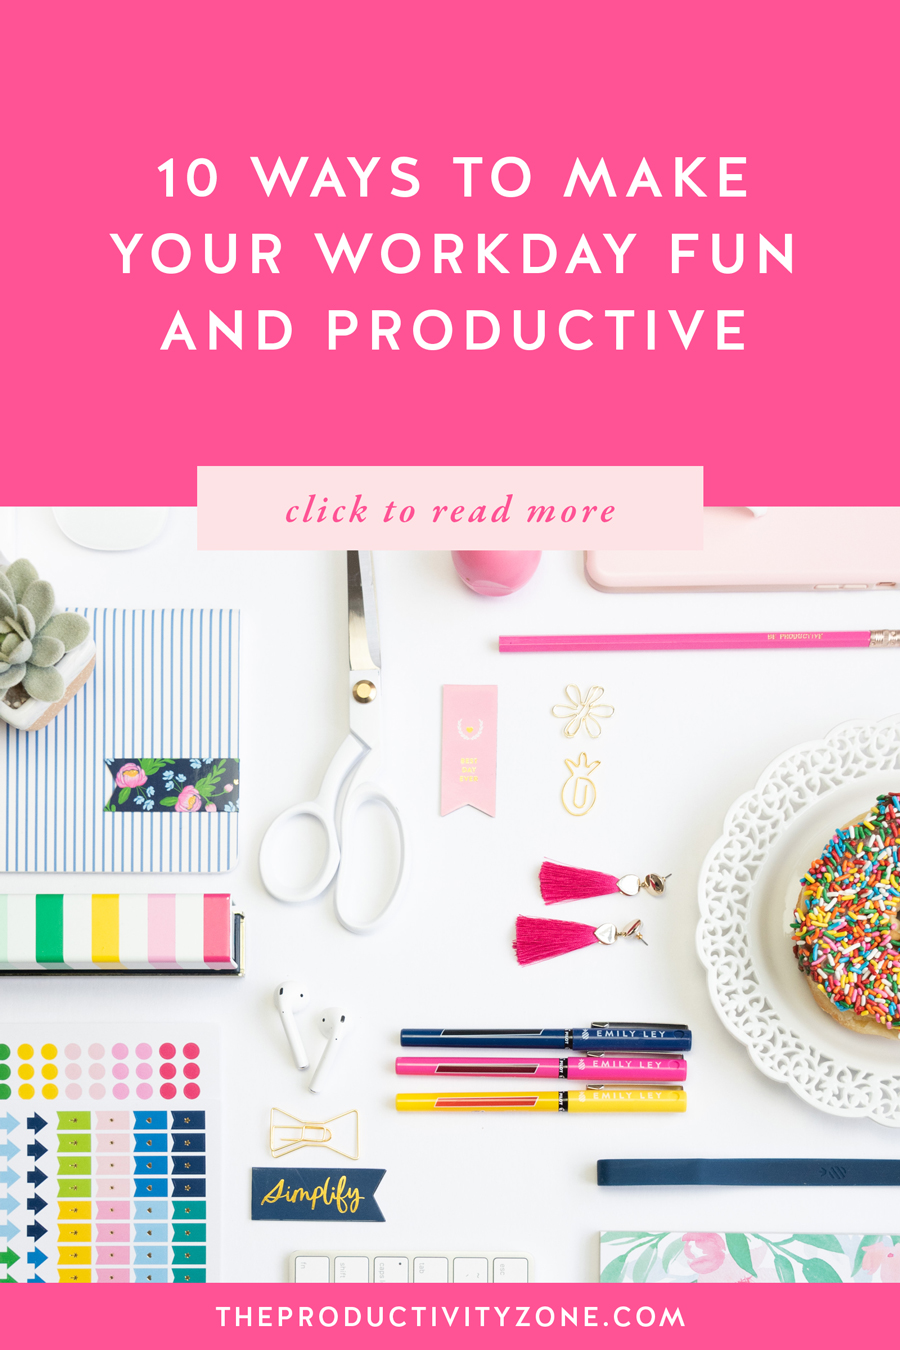 Because some work tasks will (probably always) feel like a job… Check out 10 super simple ways to make your workday fun AND productive on The Productivity Zone!!